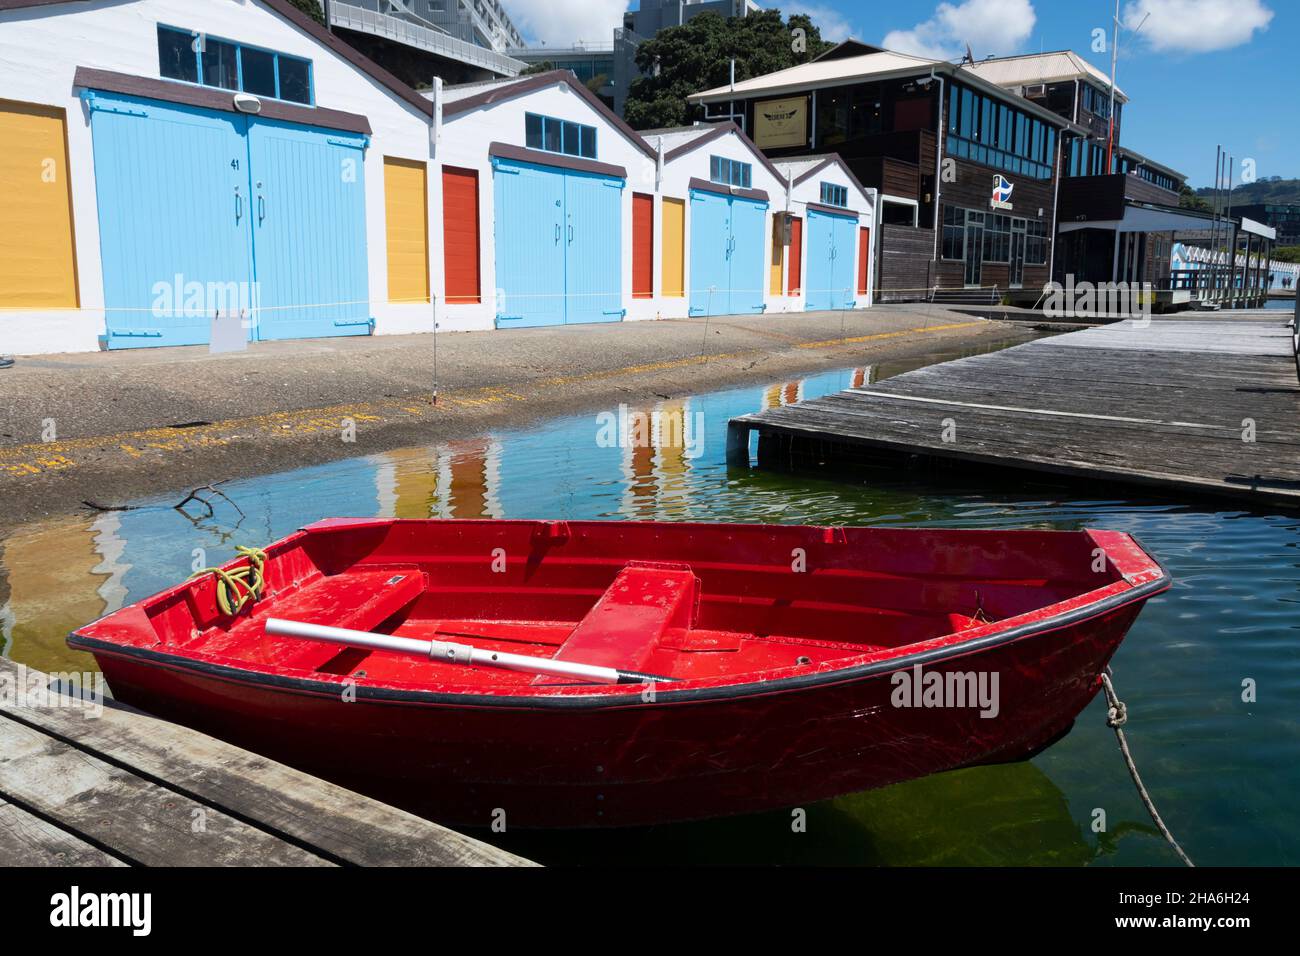 Red dingy in front of Blue boat sheds, Boat Harbour, Wellington, North Island, New Zealand Stock Photo